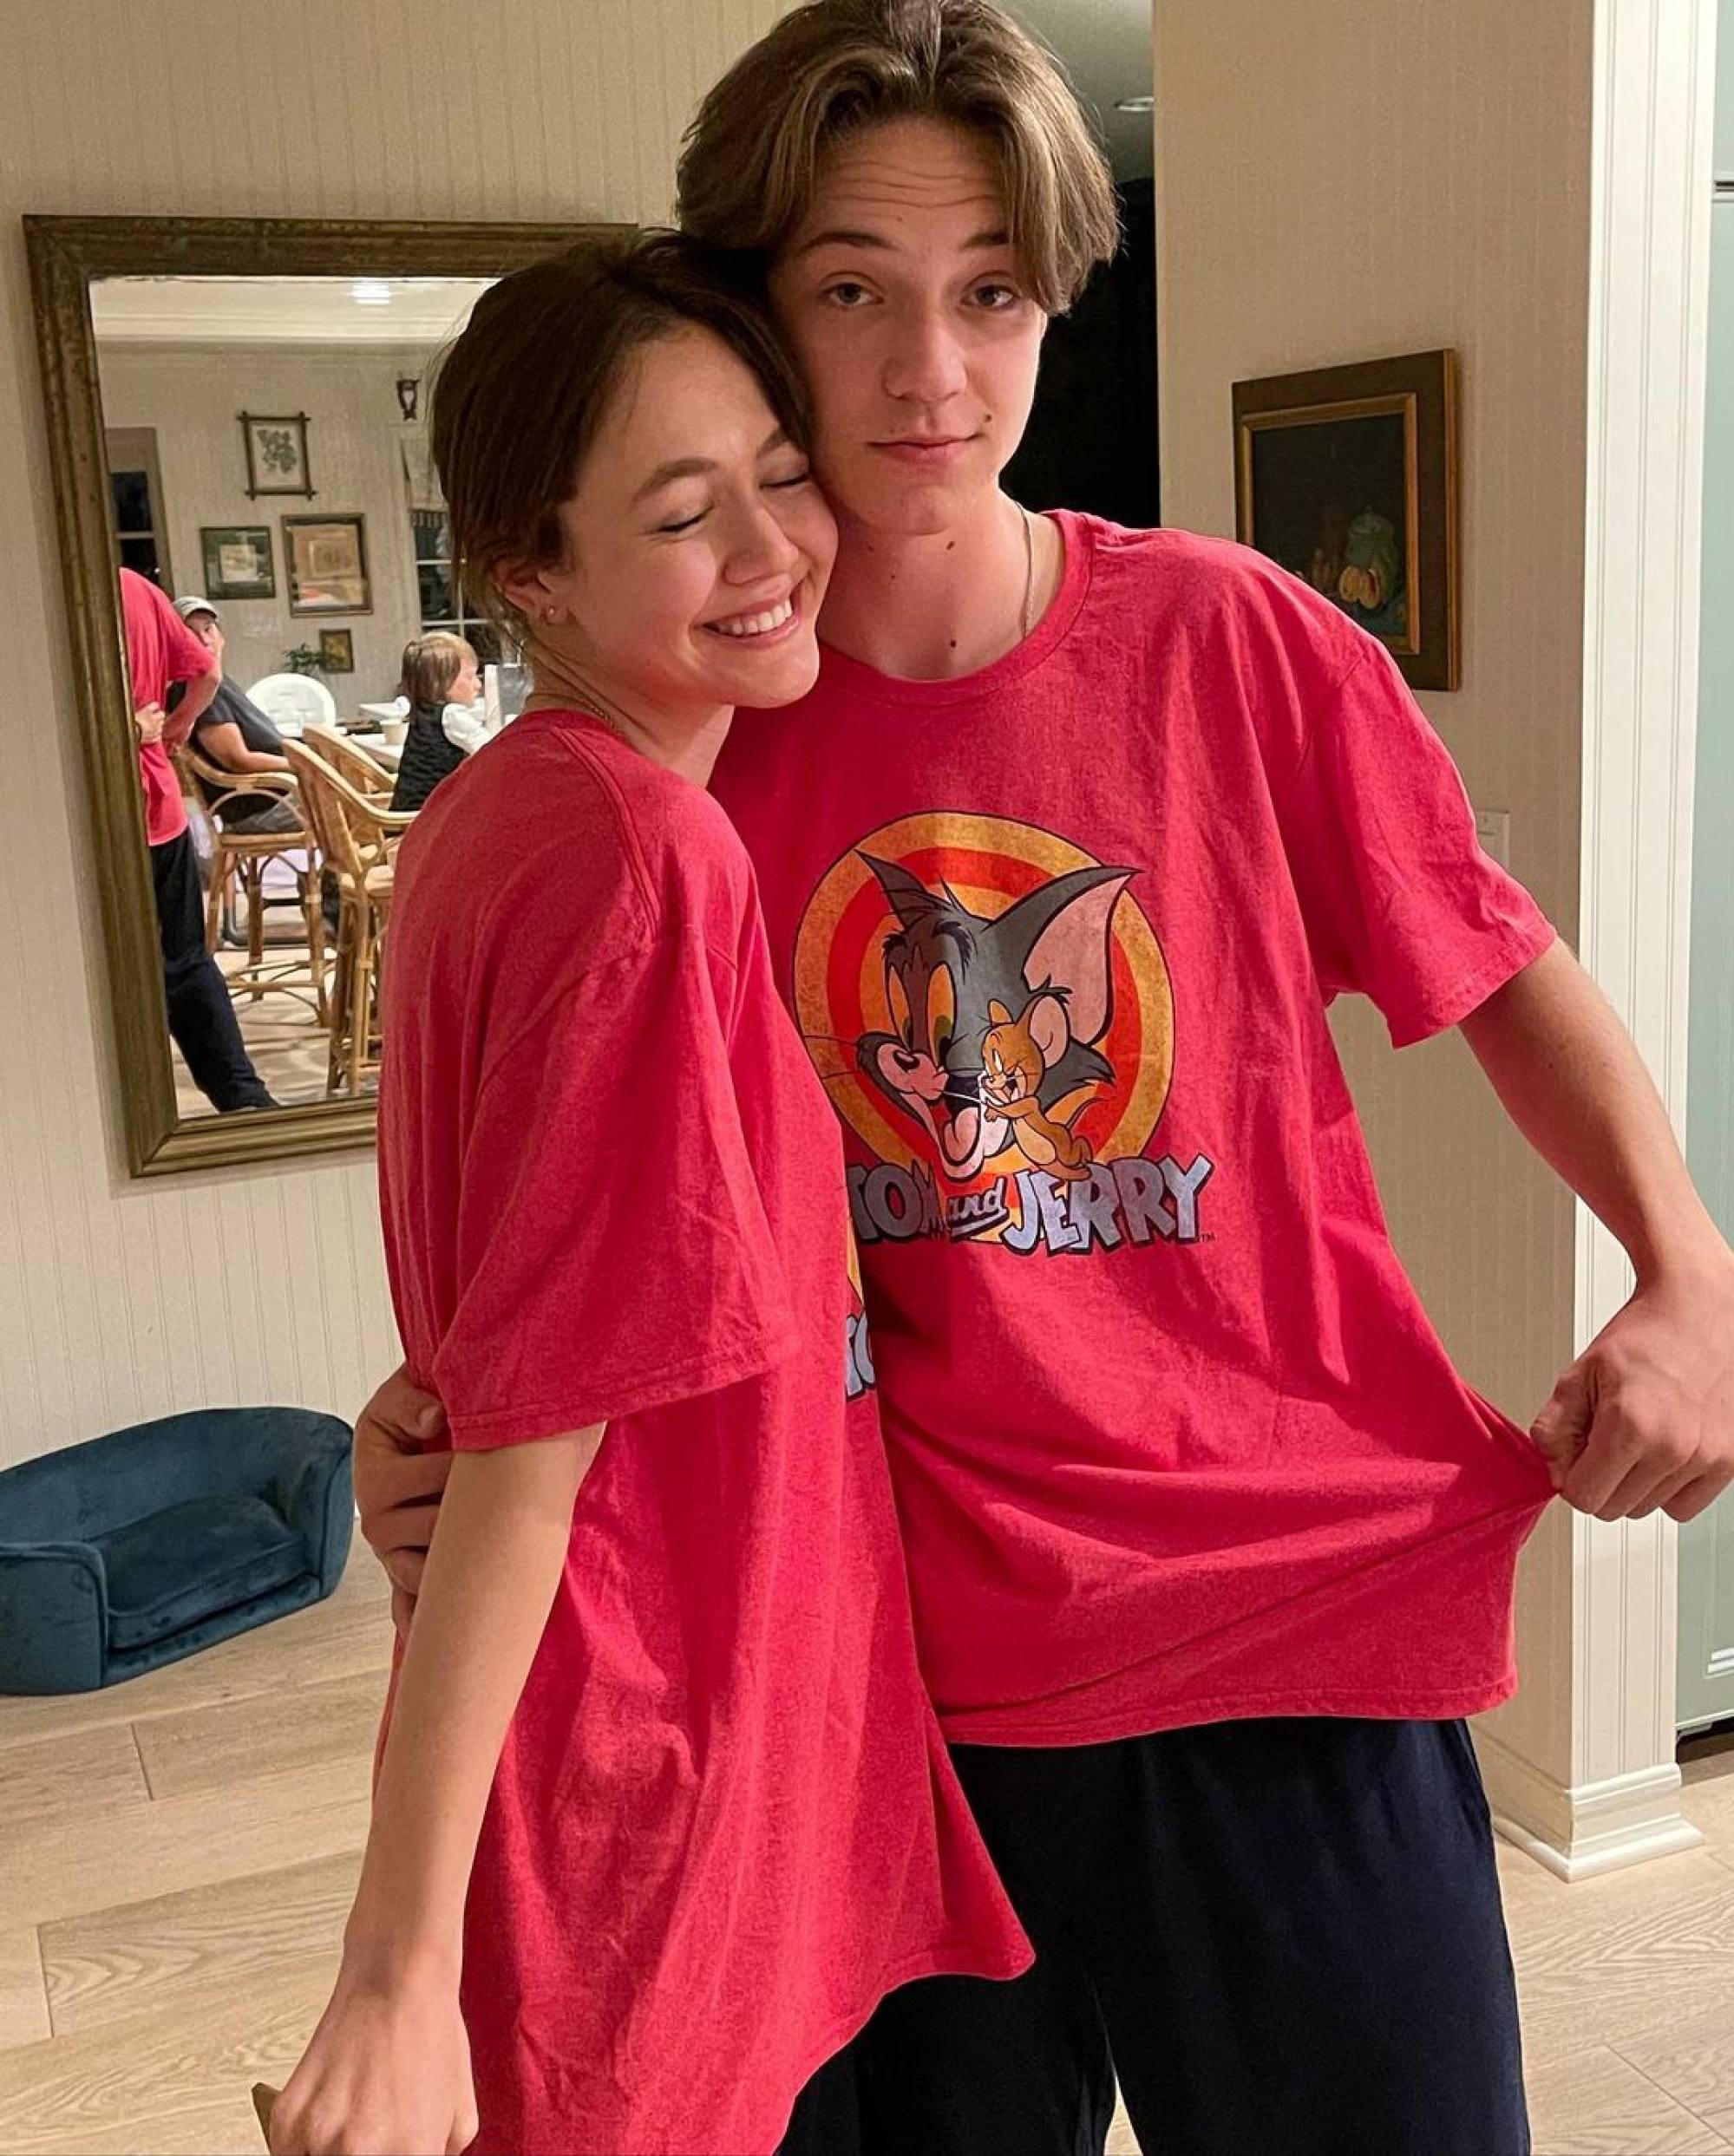 Ryder Robinson and Iris Apatow share sweet Valentine's Day photo